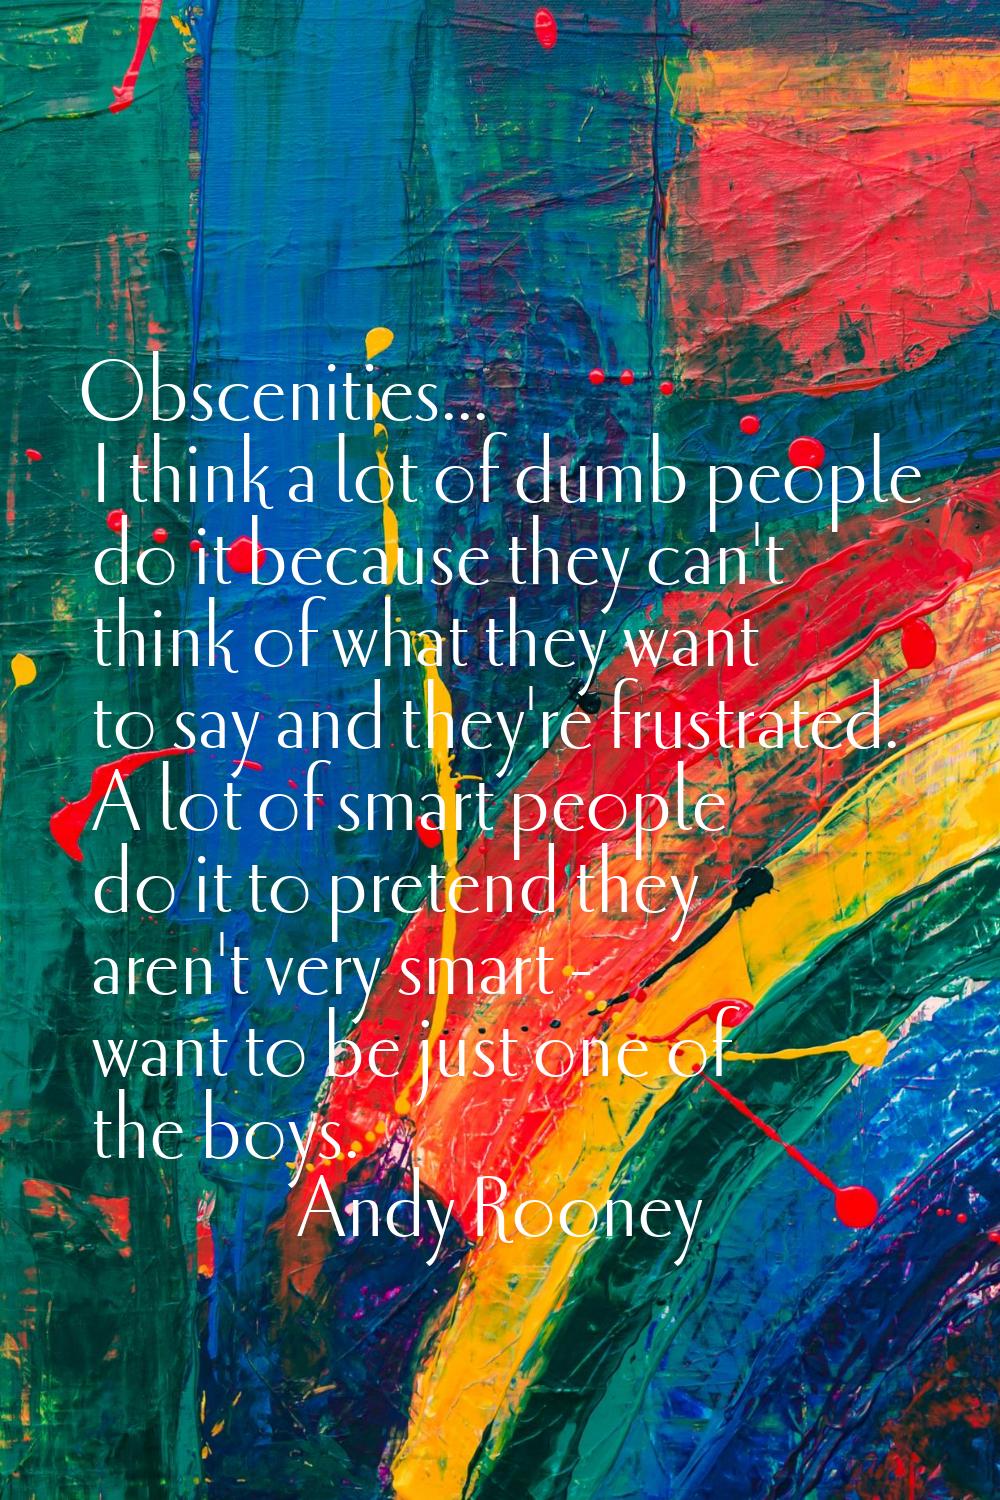 Obscenities... I think a lot of dumb people do it because they can't think of what they want to say